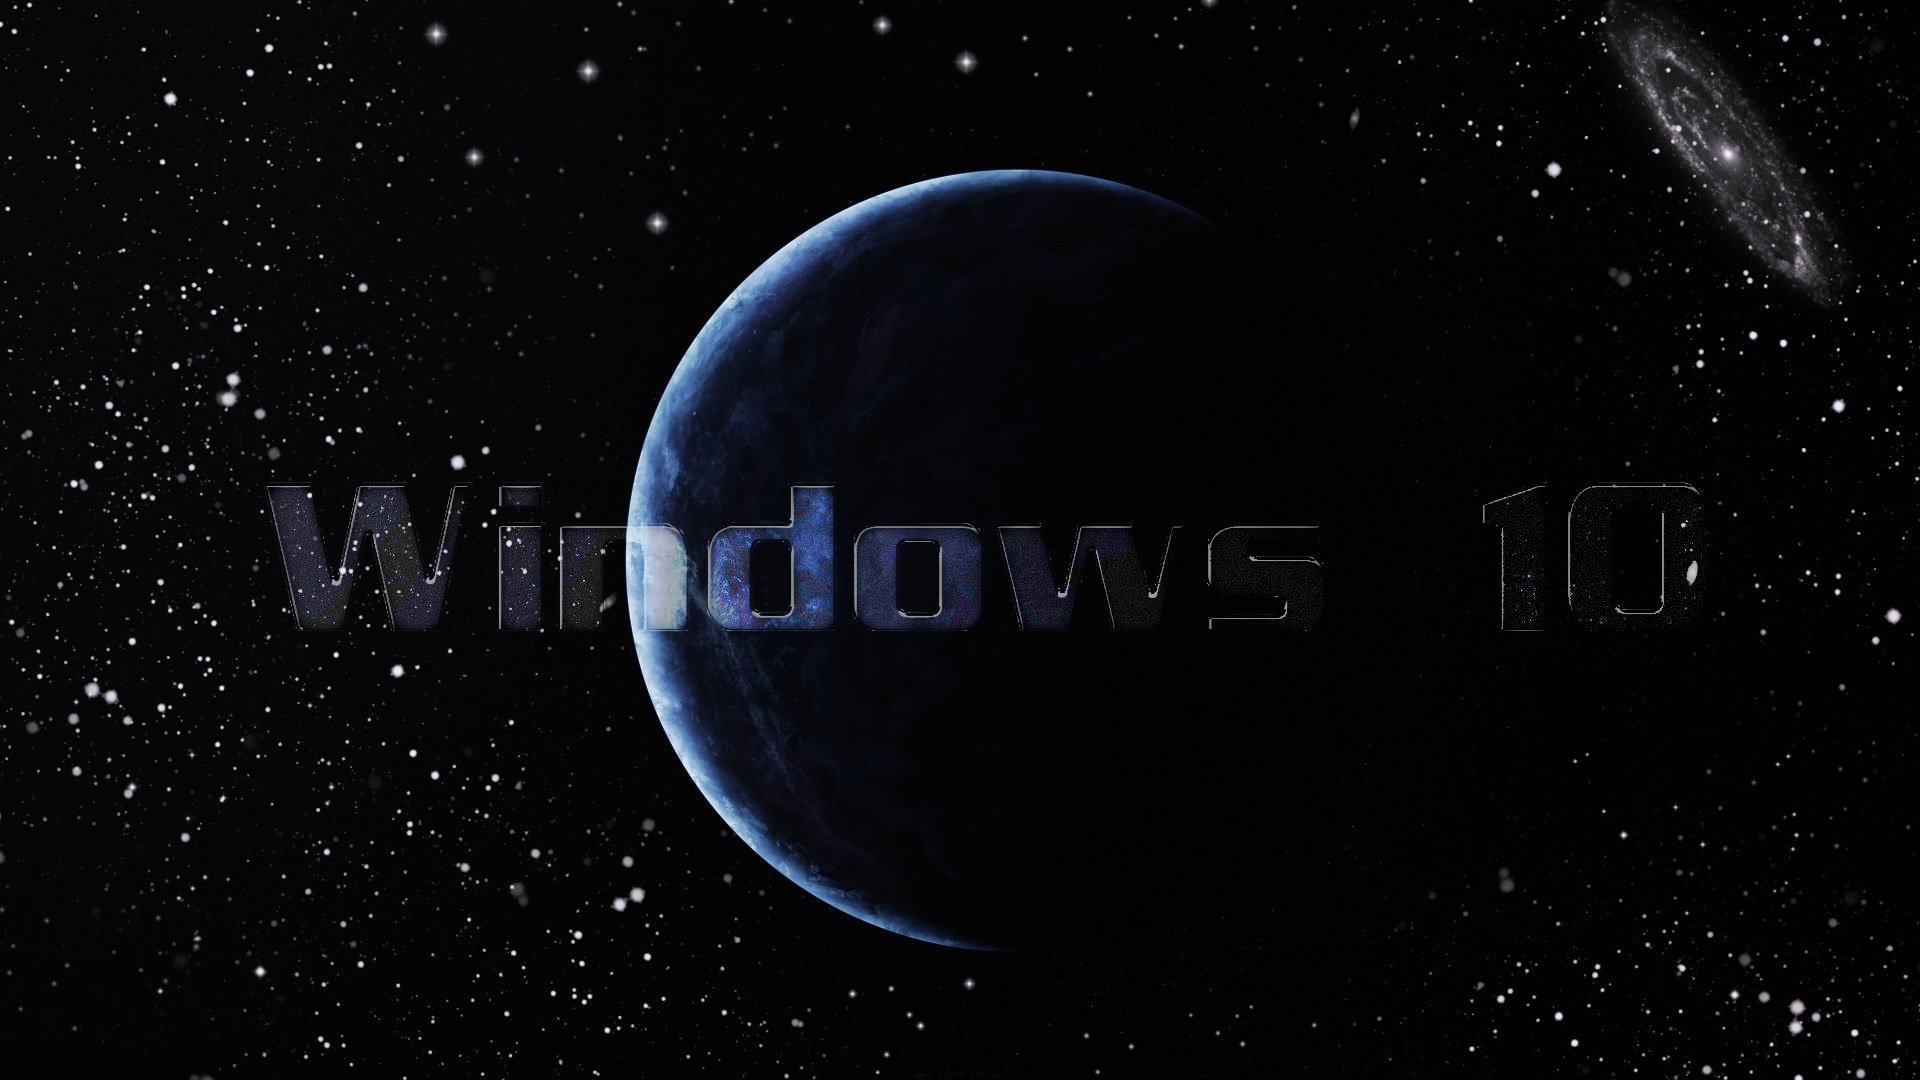 Universe Windows 10 wallpapers and images   wallpapers pictures